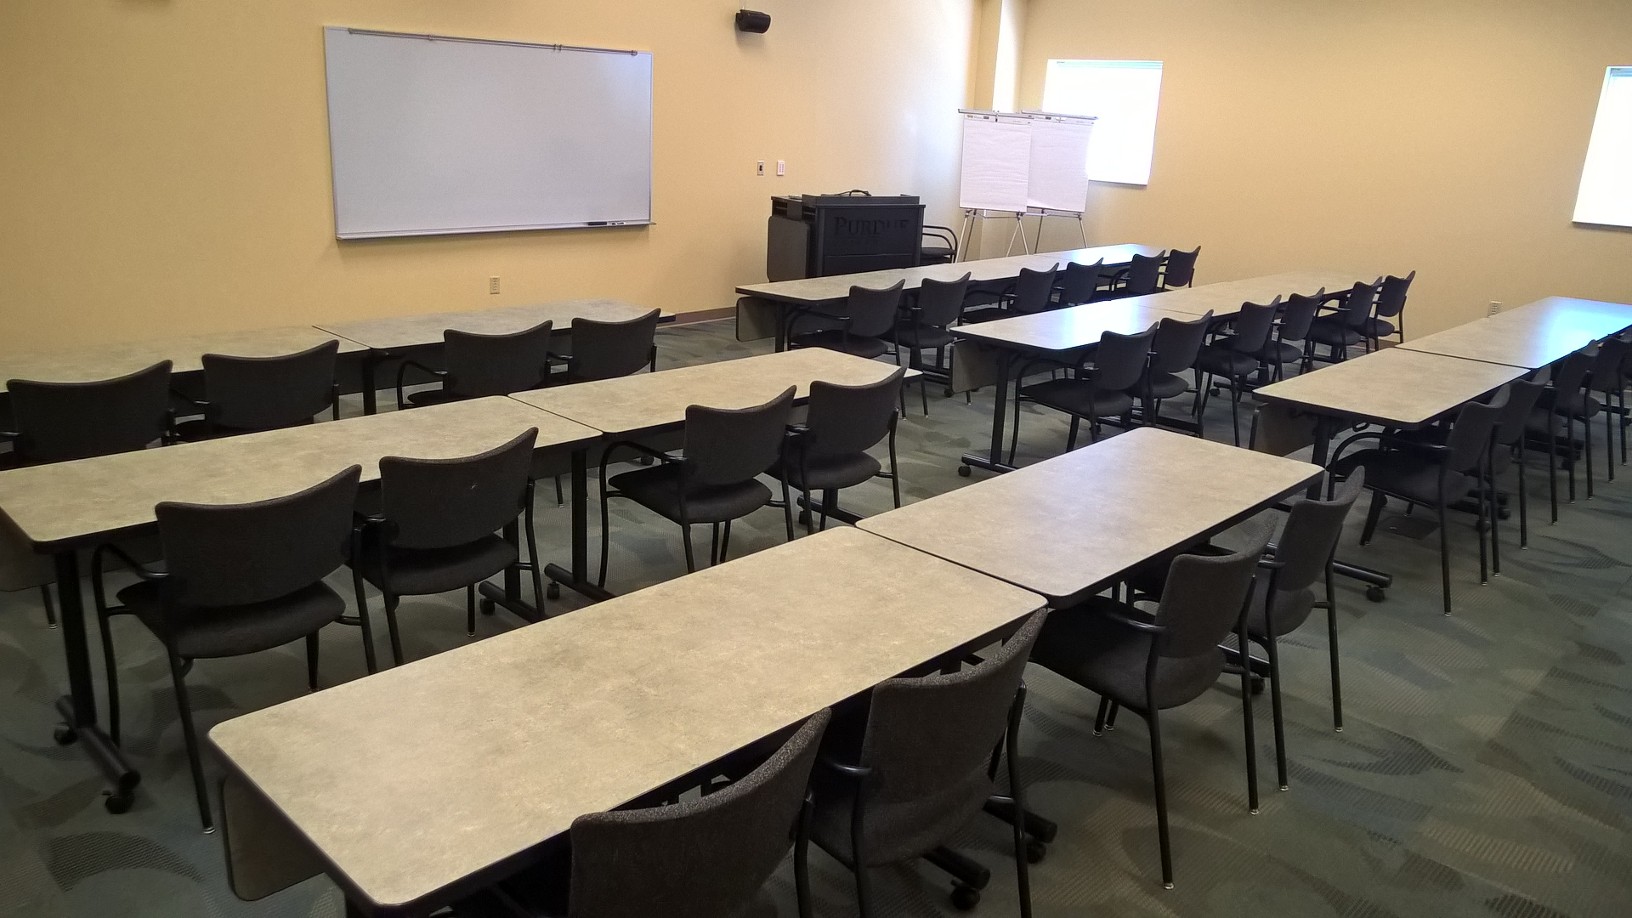 Room 117 set up in classroom style seating facing the front. Room can sit up to 32 guests in fixed, cushioned chairs. Seating faces towards the front white board and AV podium. There is a projector screen that can be rolled up or down for presentations.